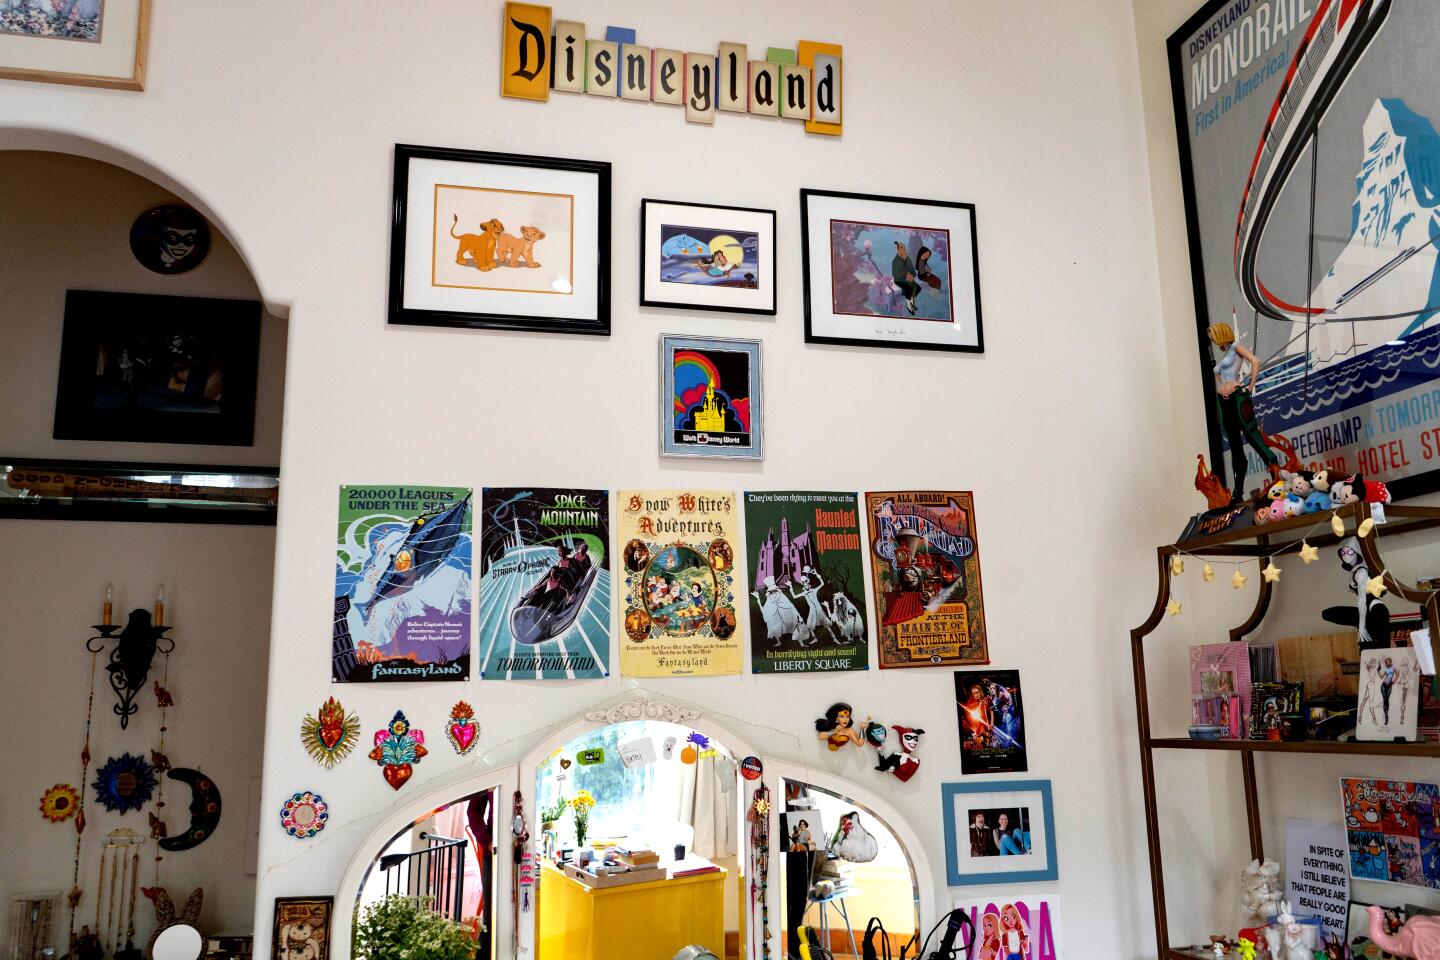 Her bedroom is filled with tributes to the DC Comics hellion Harley Quinn, including posters and animation cels.